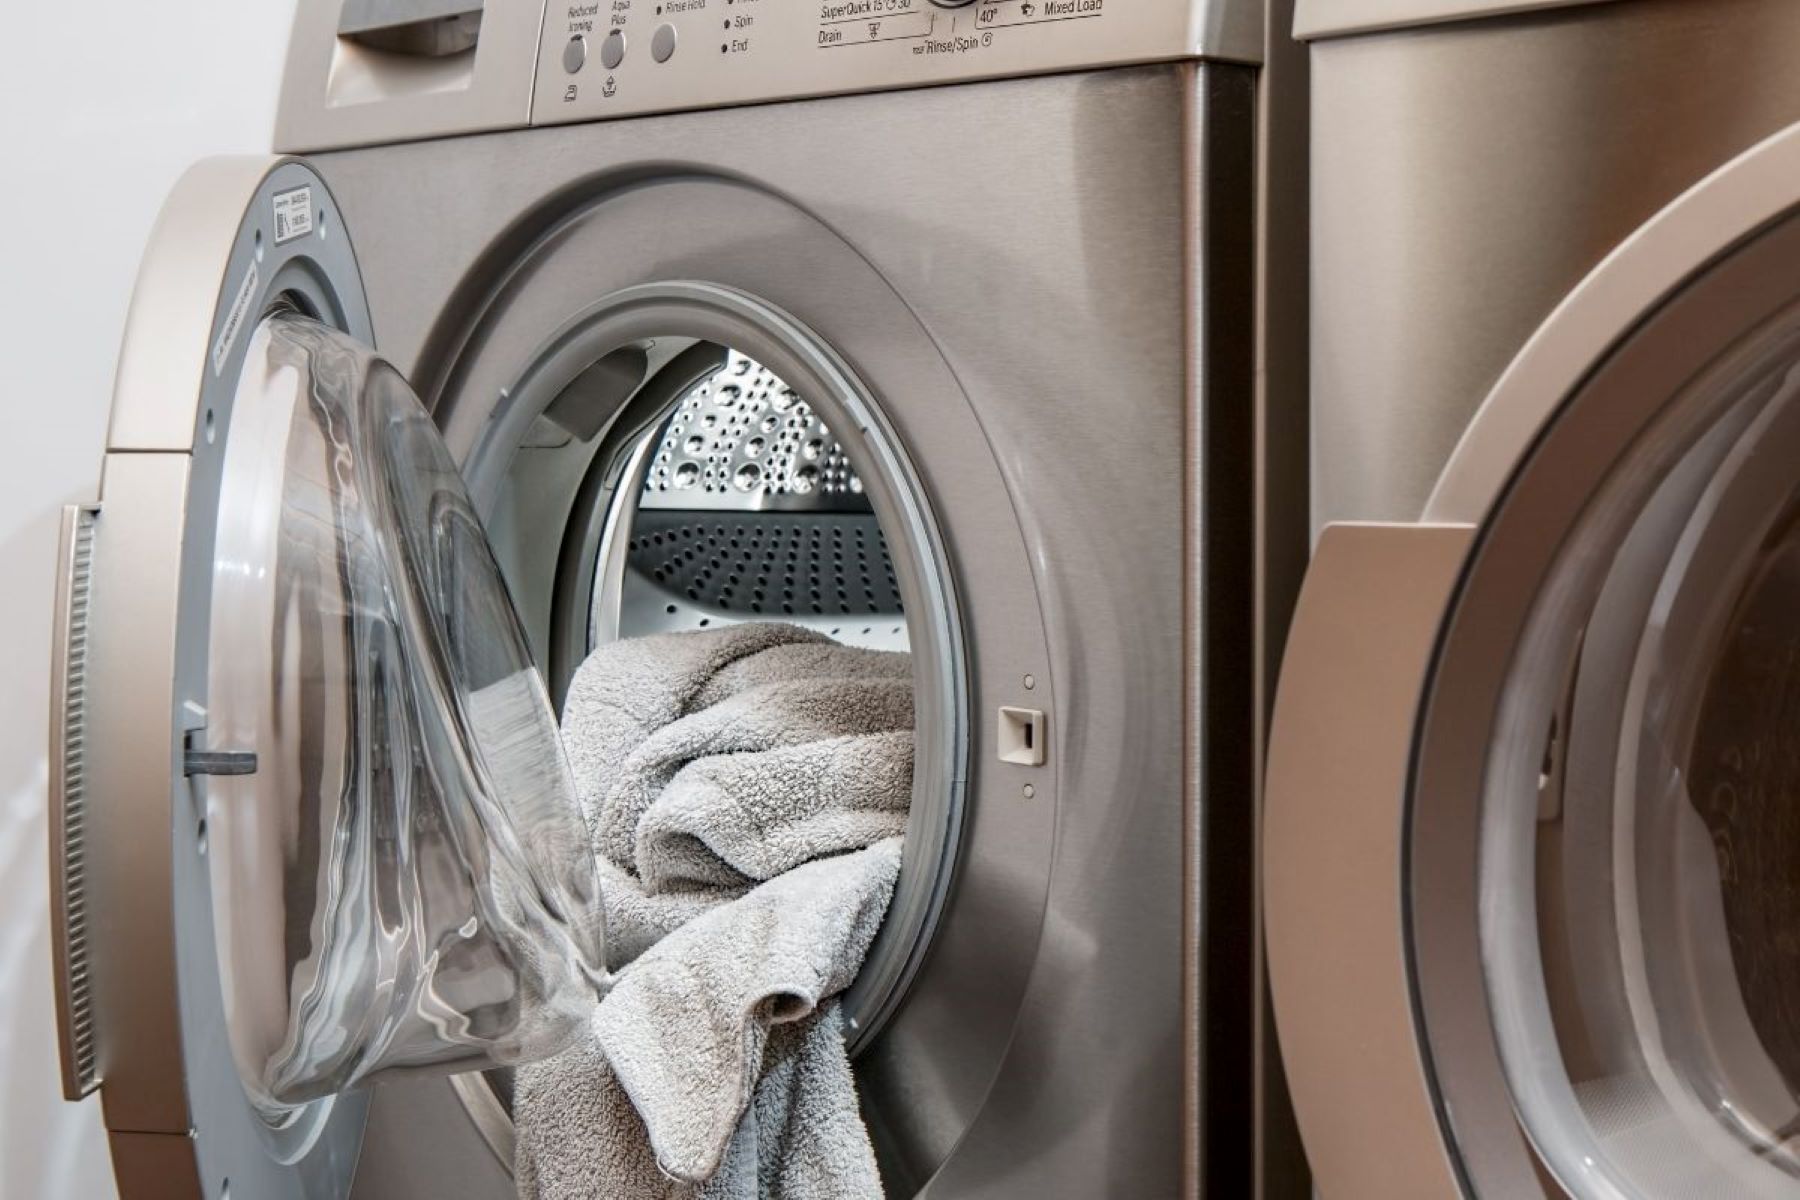 How To Fix The Error Code F22 For Whirlpool Dryer